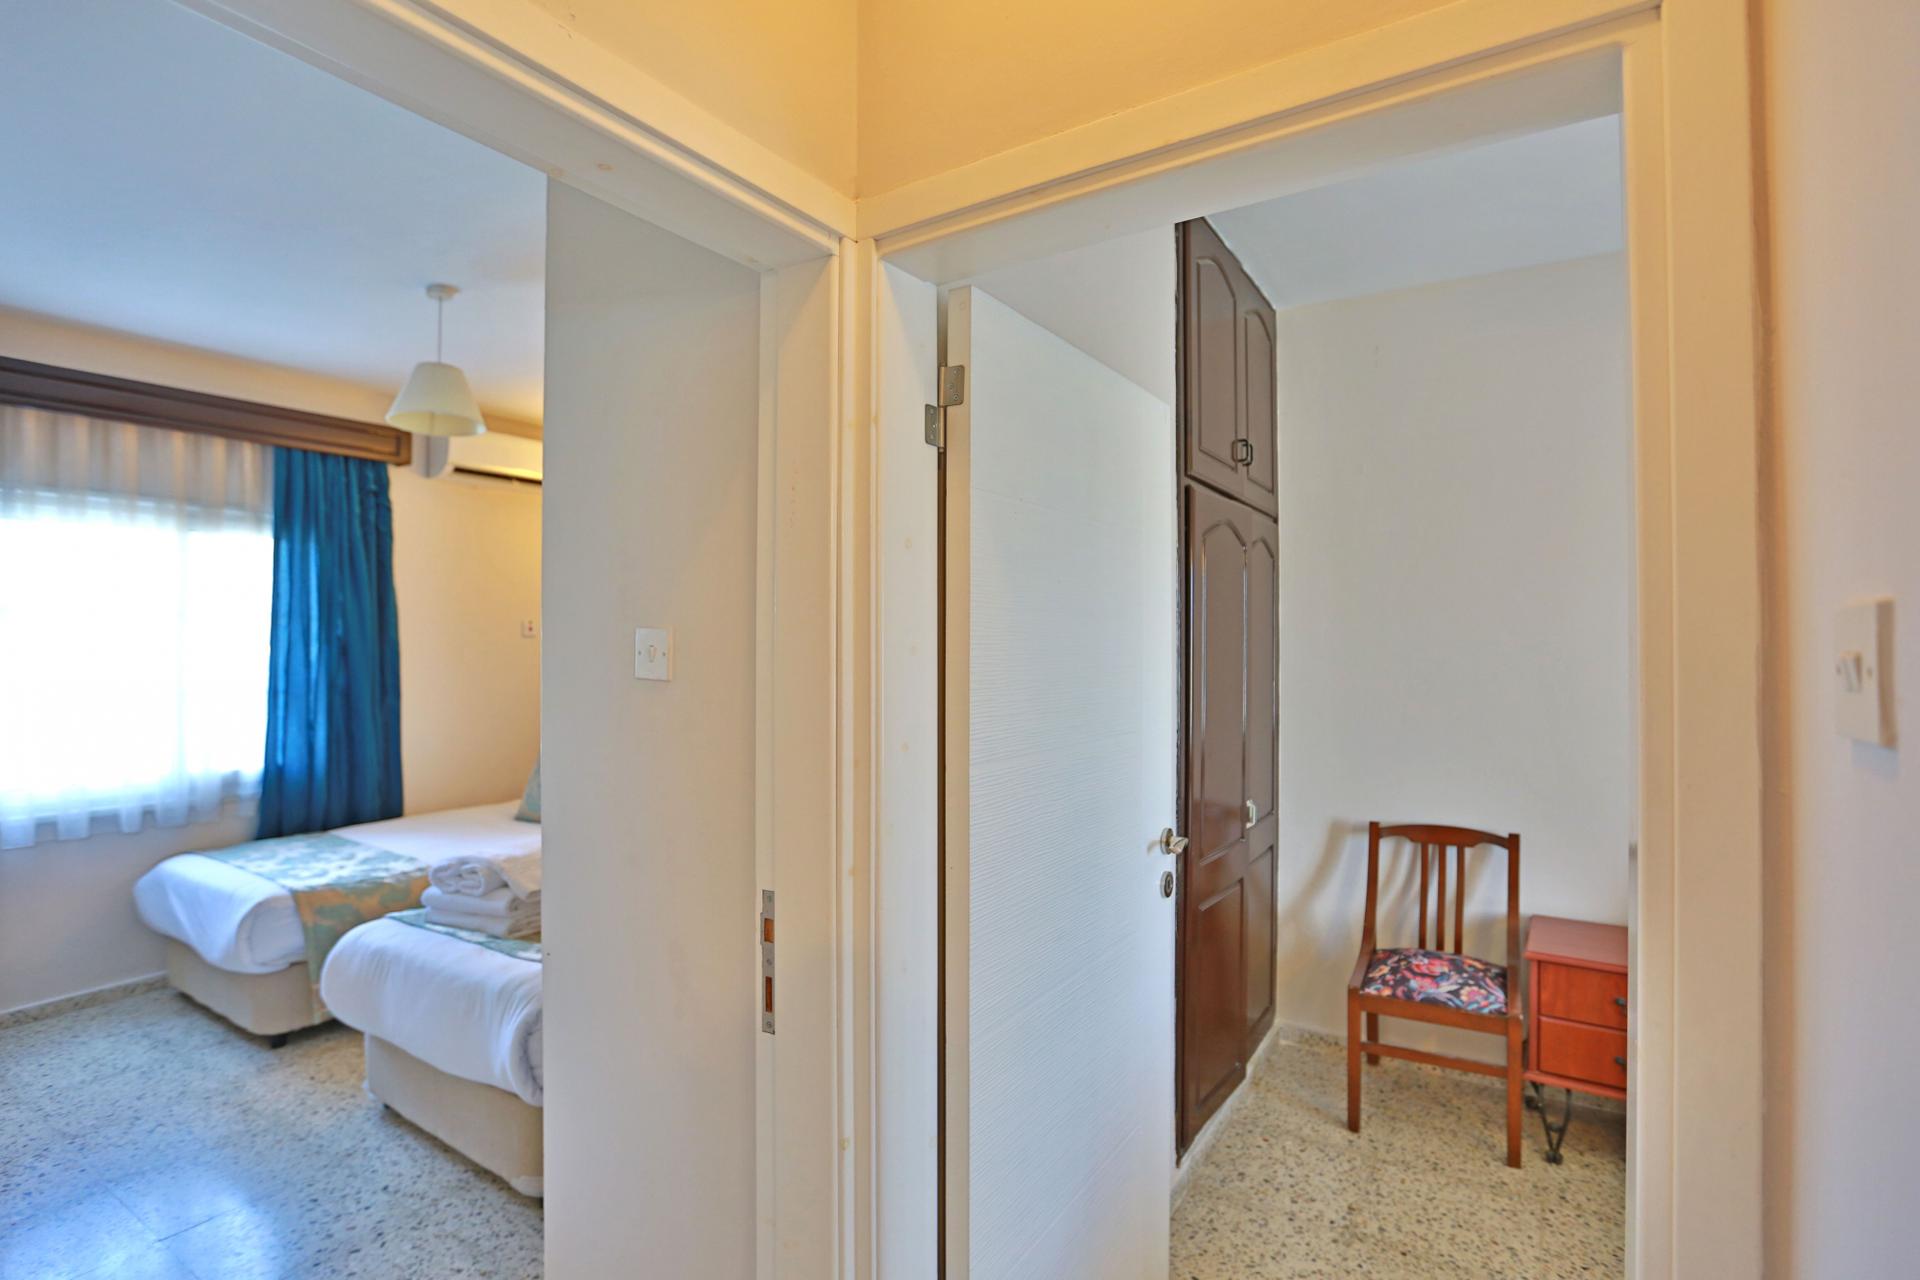 Our villa has two bedrooms.